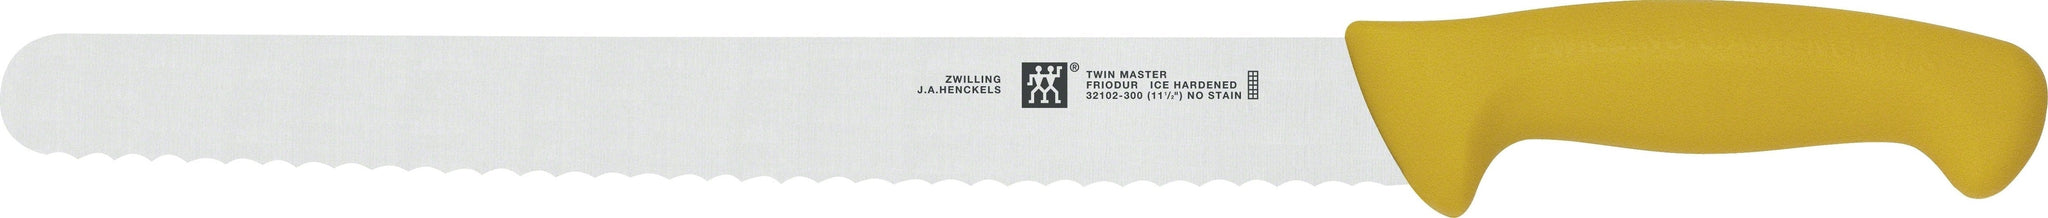 Zwilling - Twin Master 11" Stainless Steel Slicing Knife with Serrated Blade - 32102-300